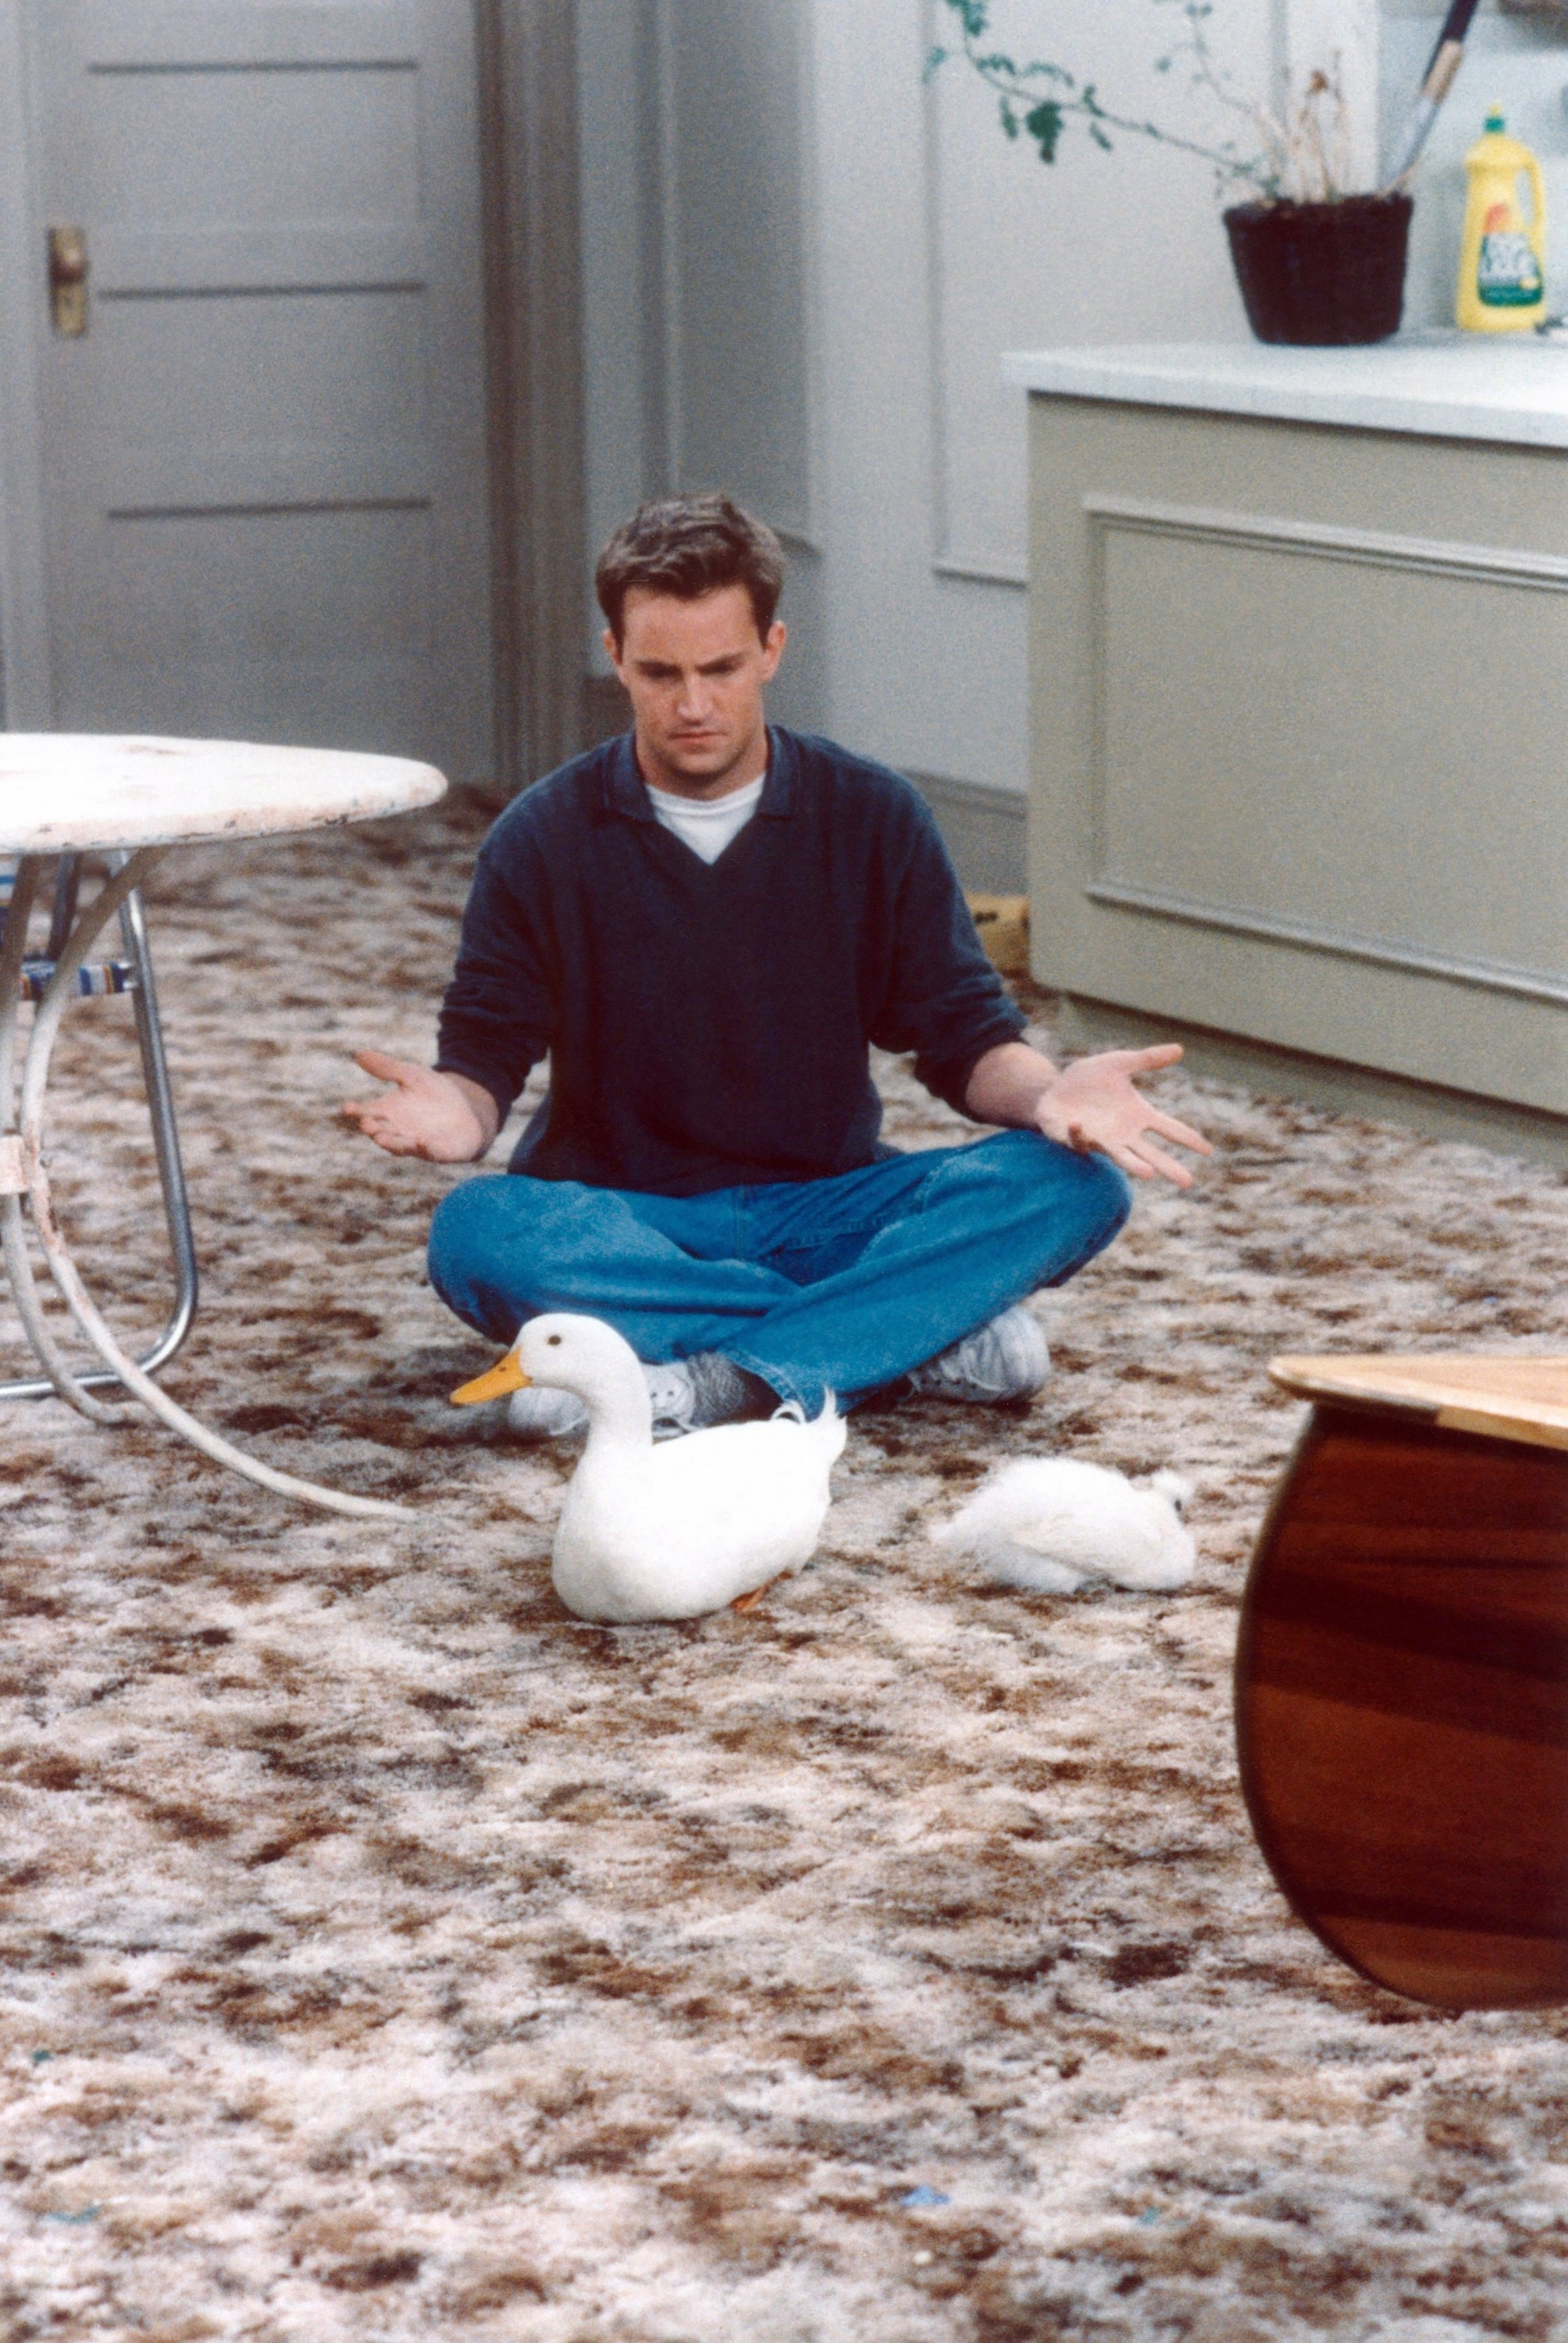 Matthew sitting on the floor with a duck in a scene from &quot;Friends&quot;